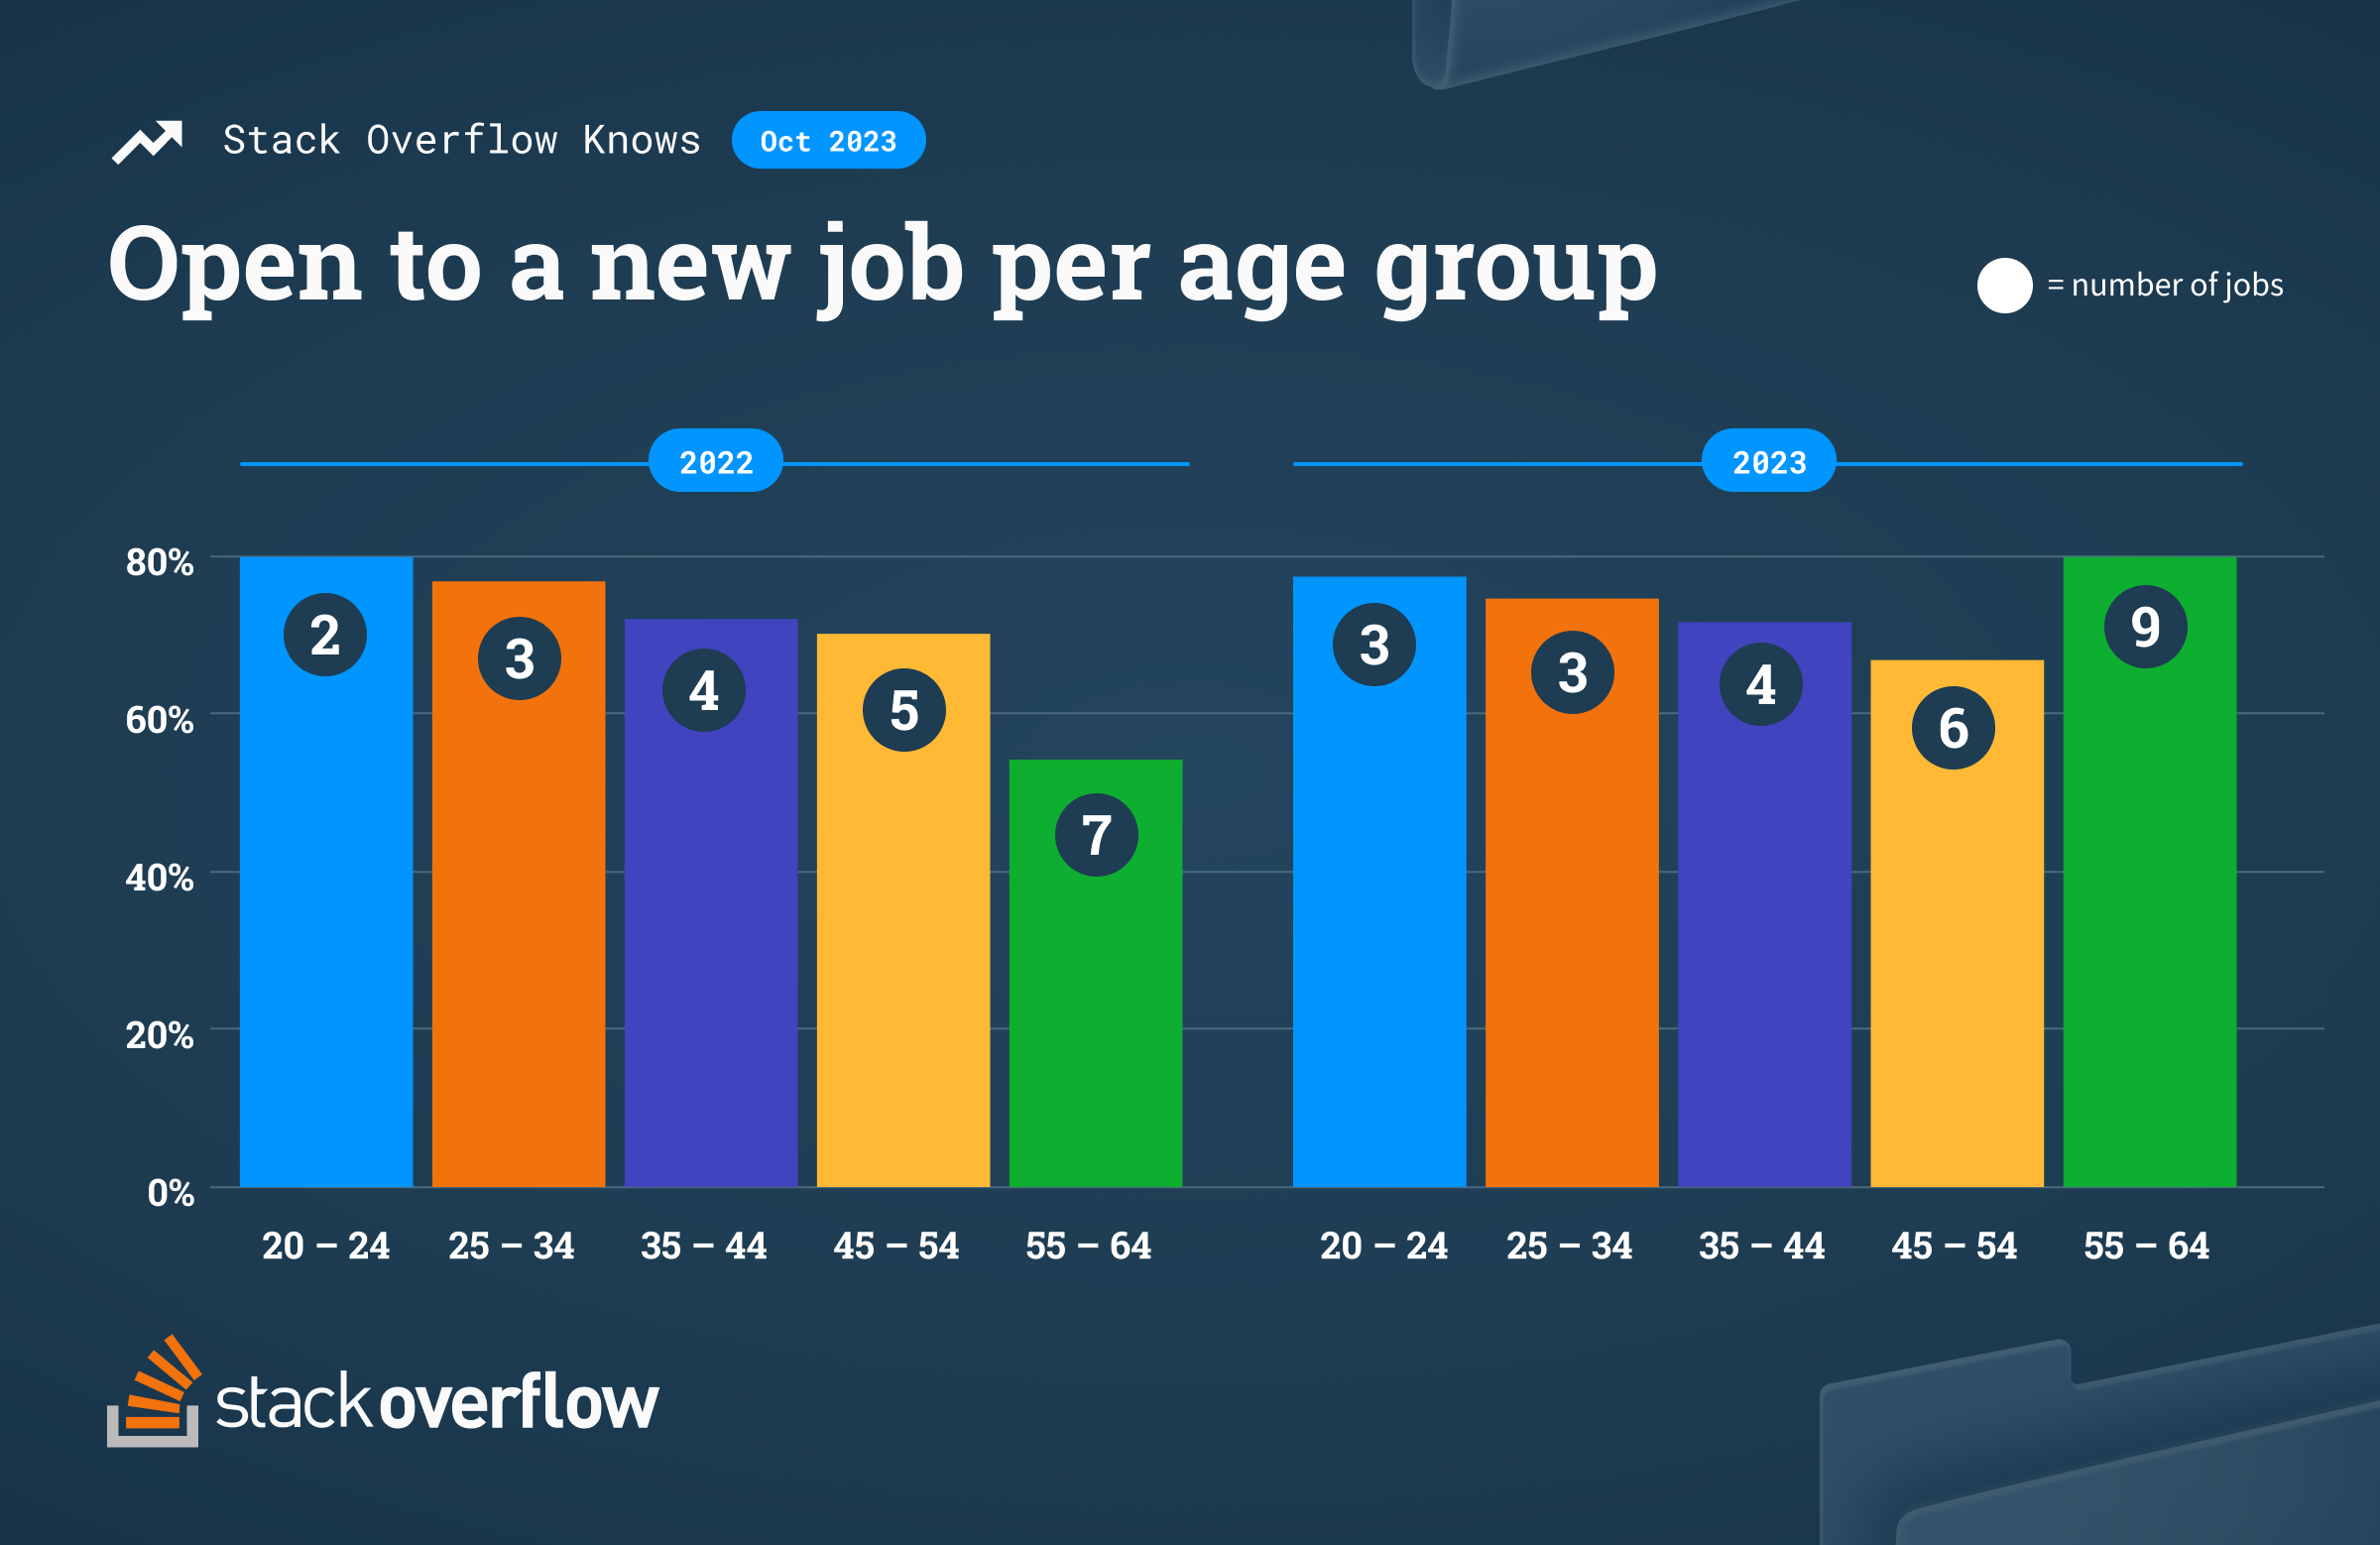 Those open to or actively looking for a new job were higher for younger developers in 2022, and in 2023 late-career developers are more likely to be open or actively searching than new tech talent.